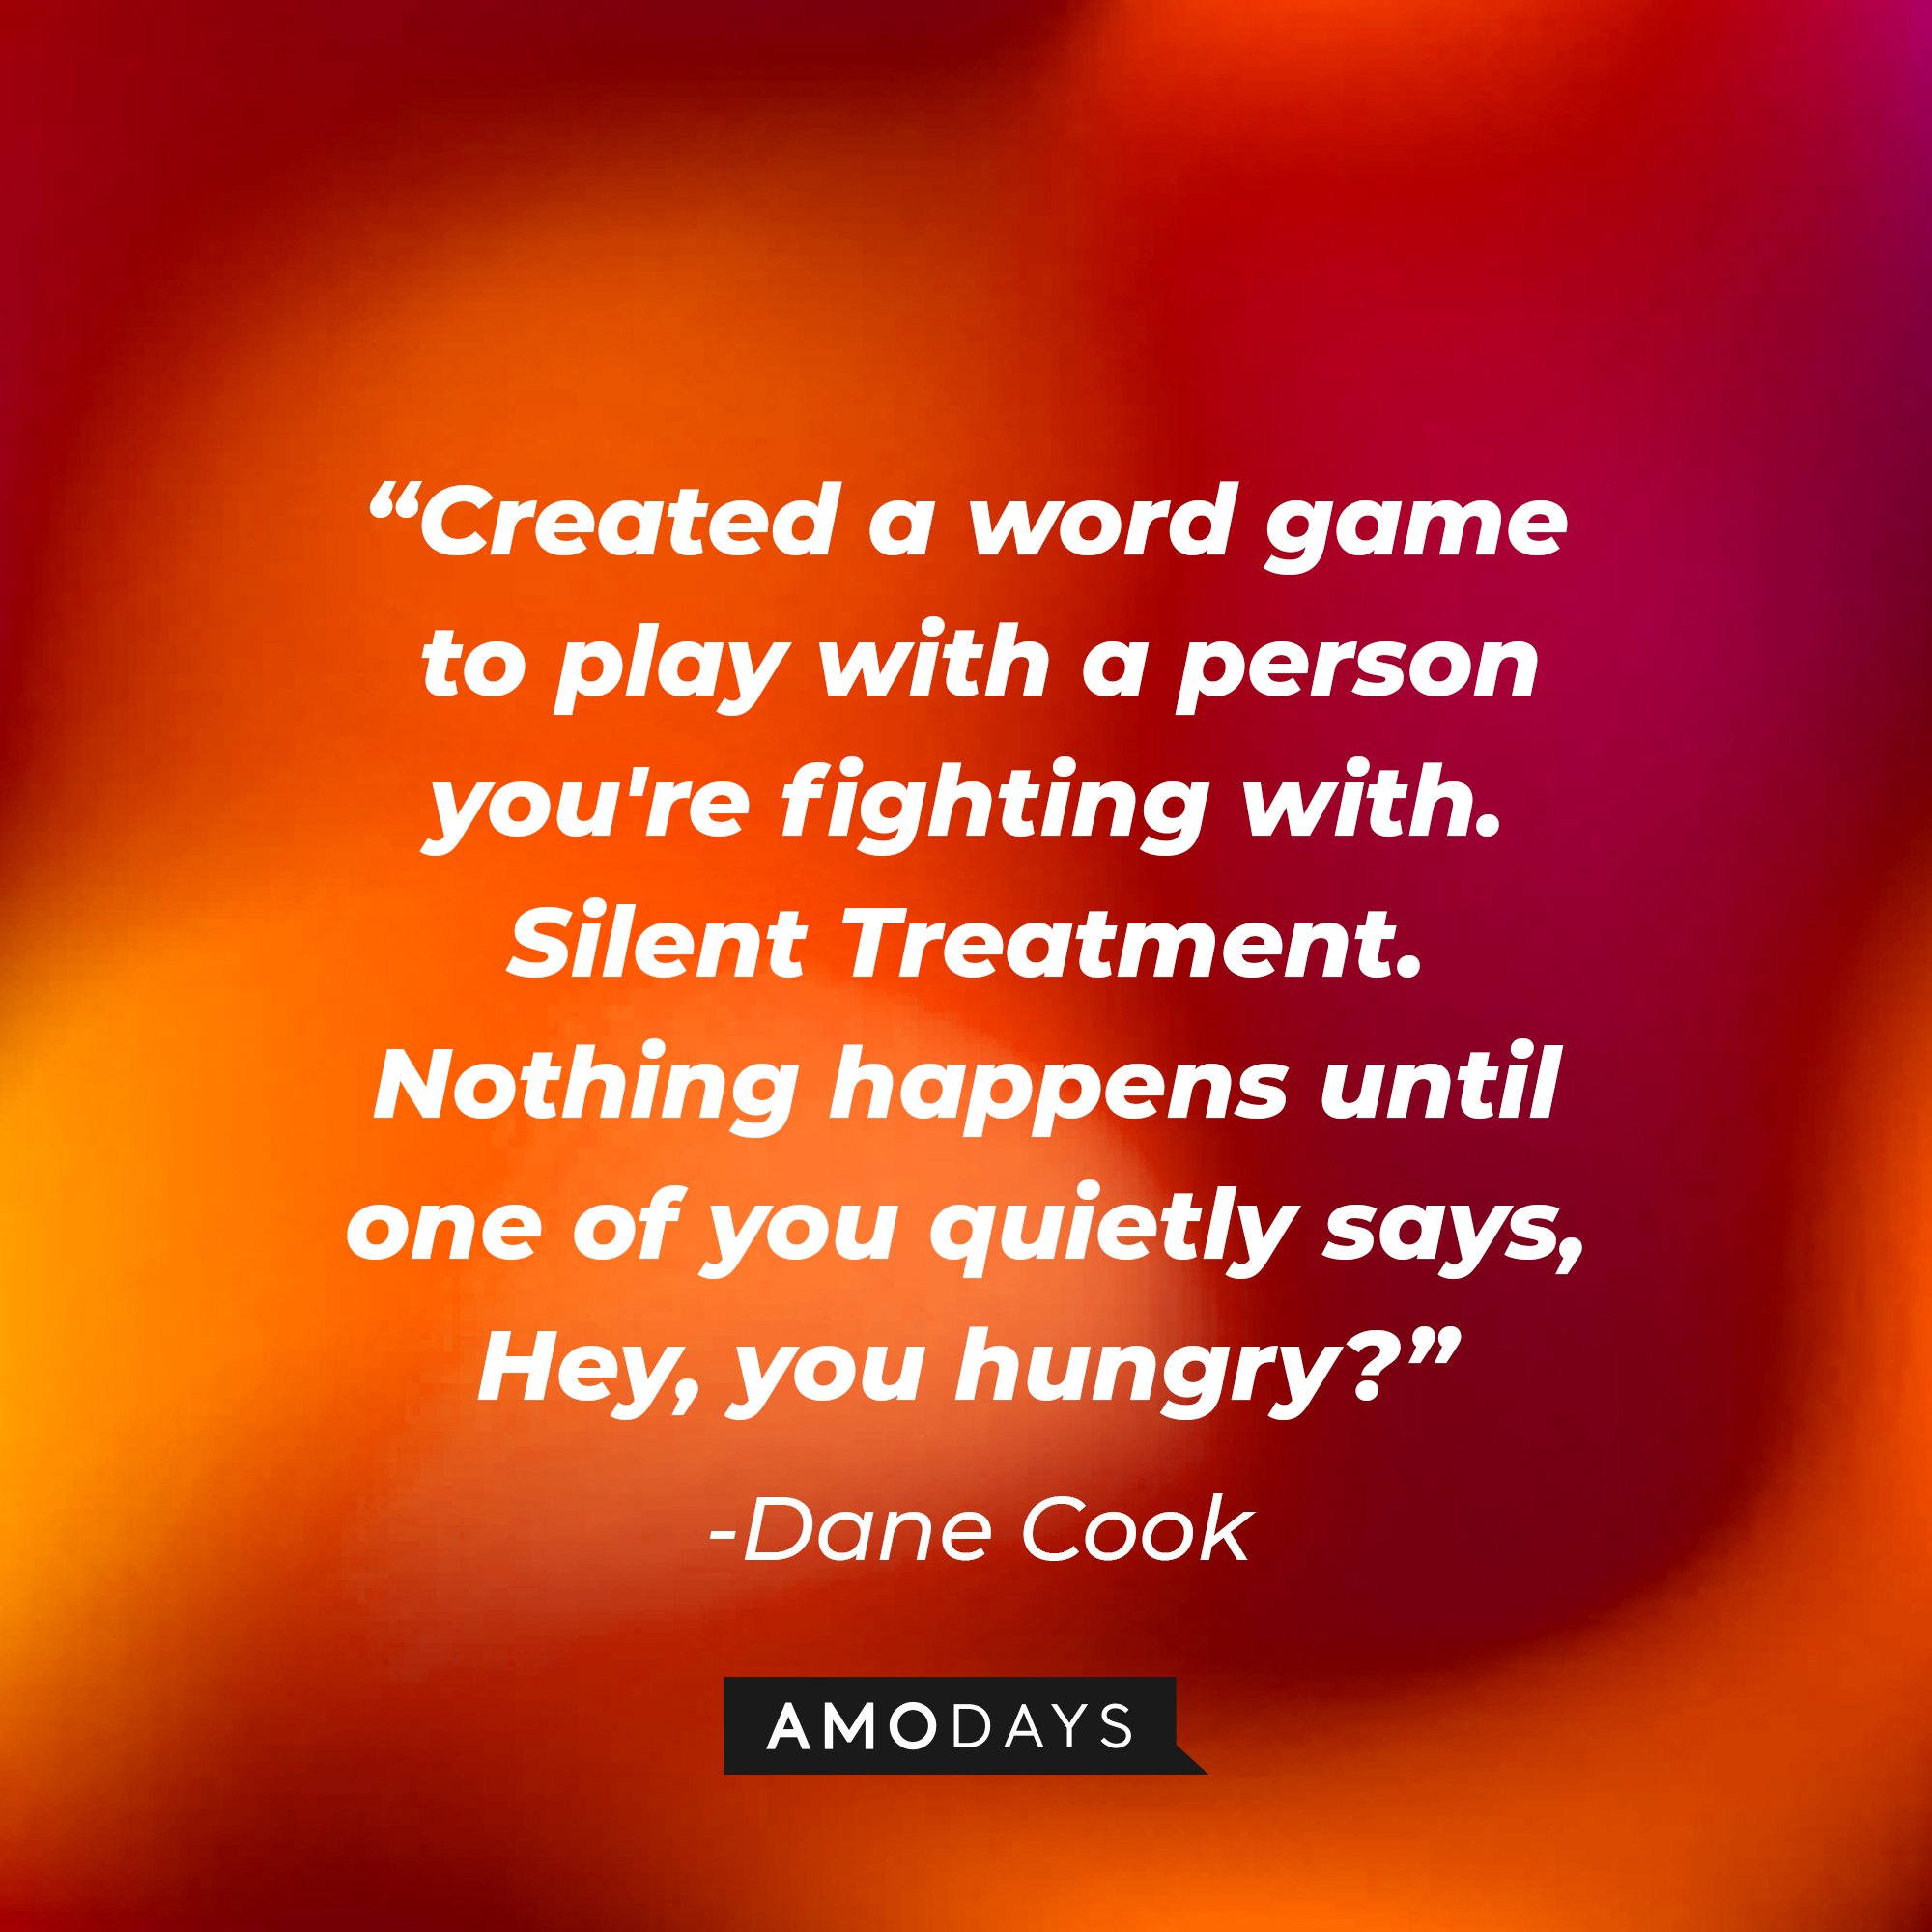 Dane Cook's quote:\\\\u00a0"Created a word game to play with a person you're fighting with. Silent Treatment. Nothing happens until one of you quietly says, Hey, you hungry?"\\\\u00a0| Image: AmoDays